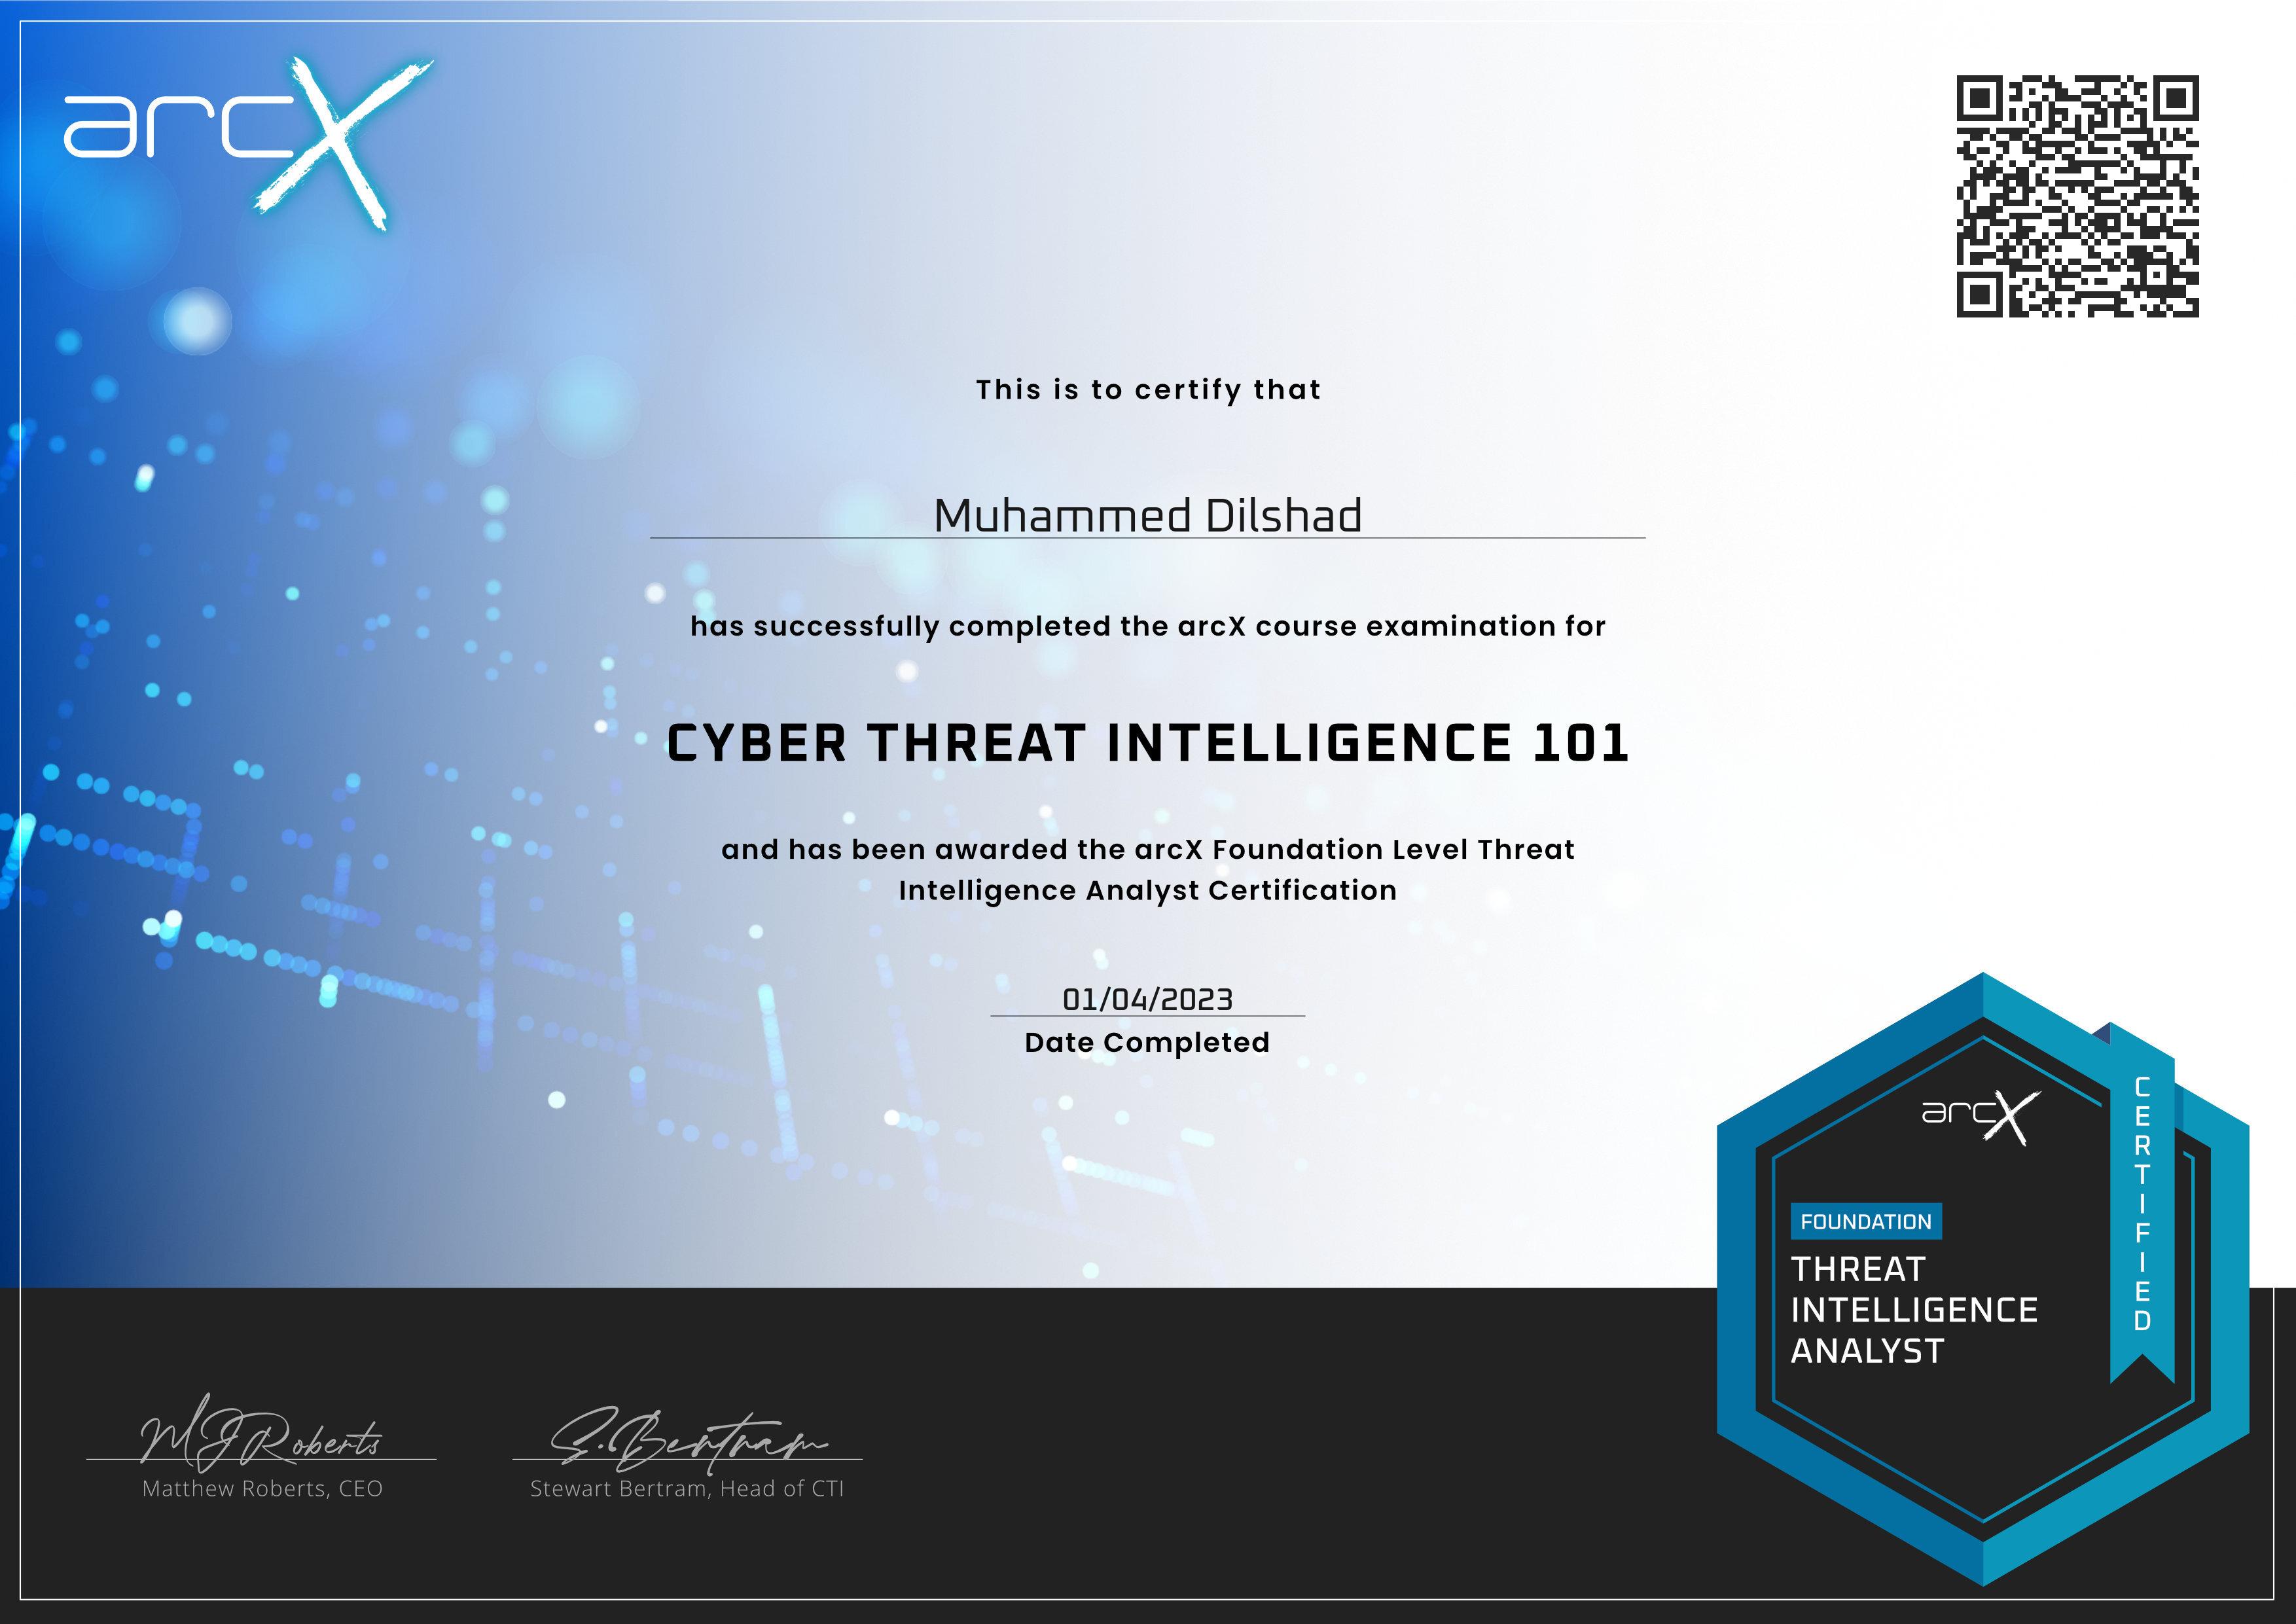 This is to certify that

~ Muhammed Dilshad

has successfully completed the arcX course examination for

CYBER THREAT INTELLIGENCE 101

and has been awarded the arcX Foundation Level Threat
Intelligence Analyst Certification

  

01/04/2023
Date Completed

case

FOUNDATION

Bla 1a=AN
RRS NRICI)\ =

ANALYST